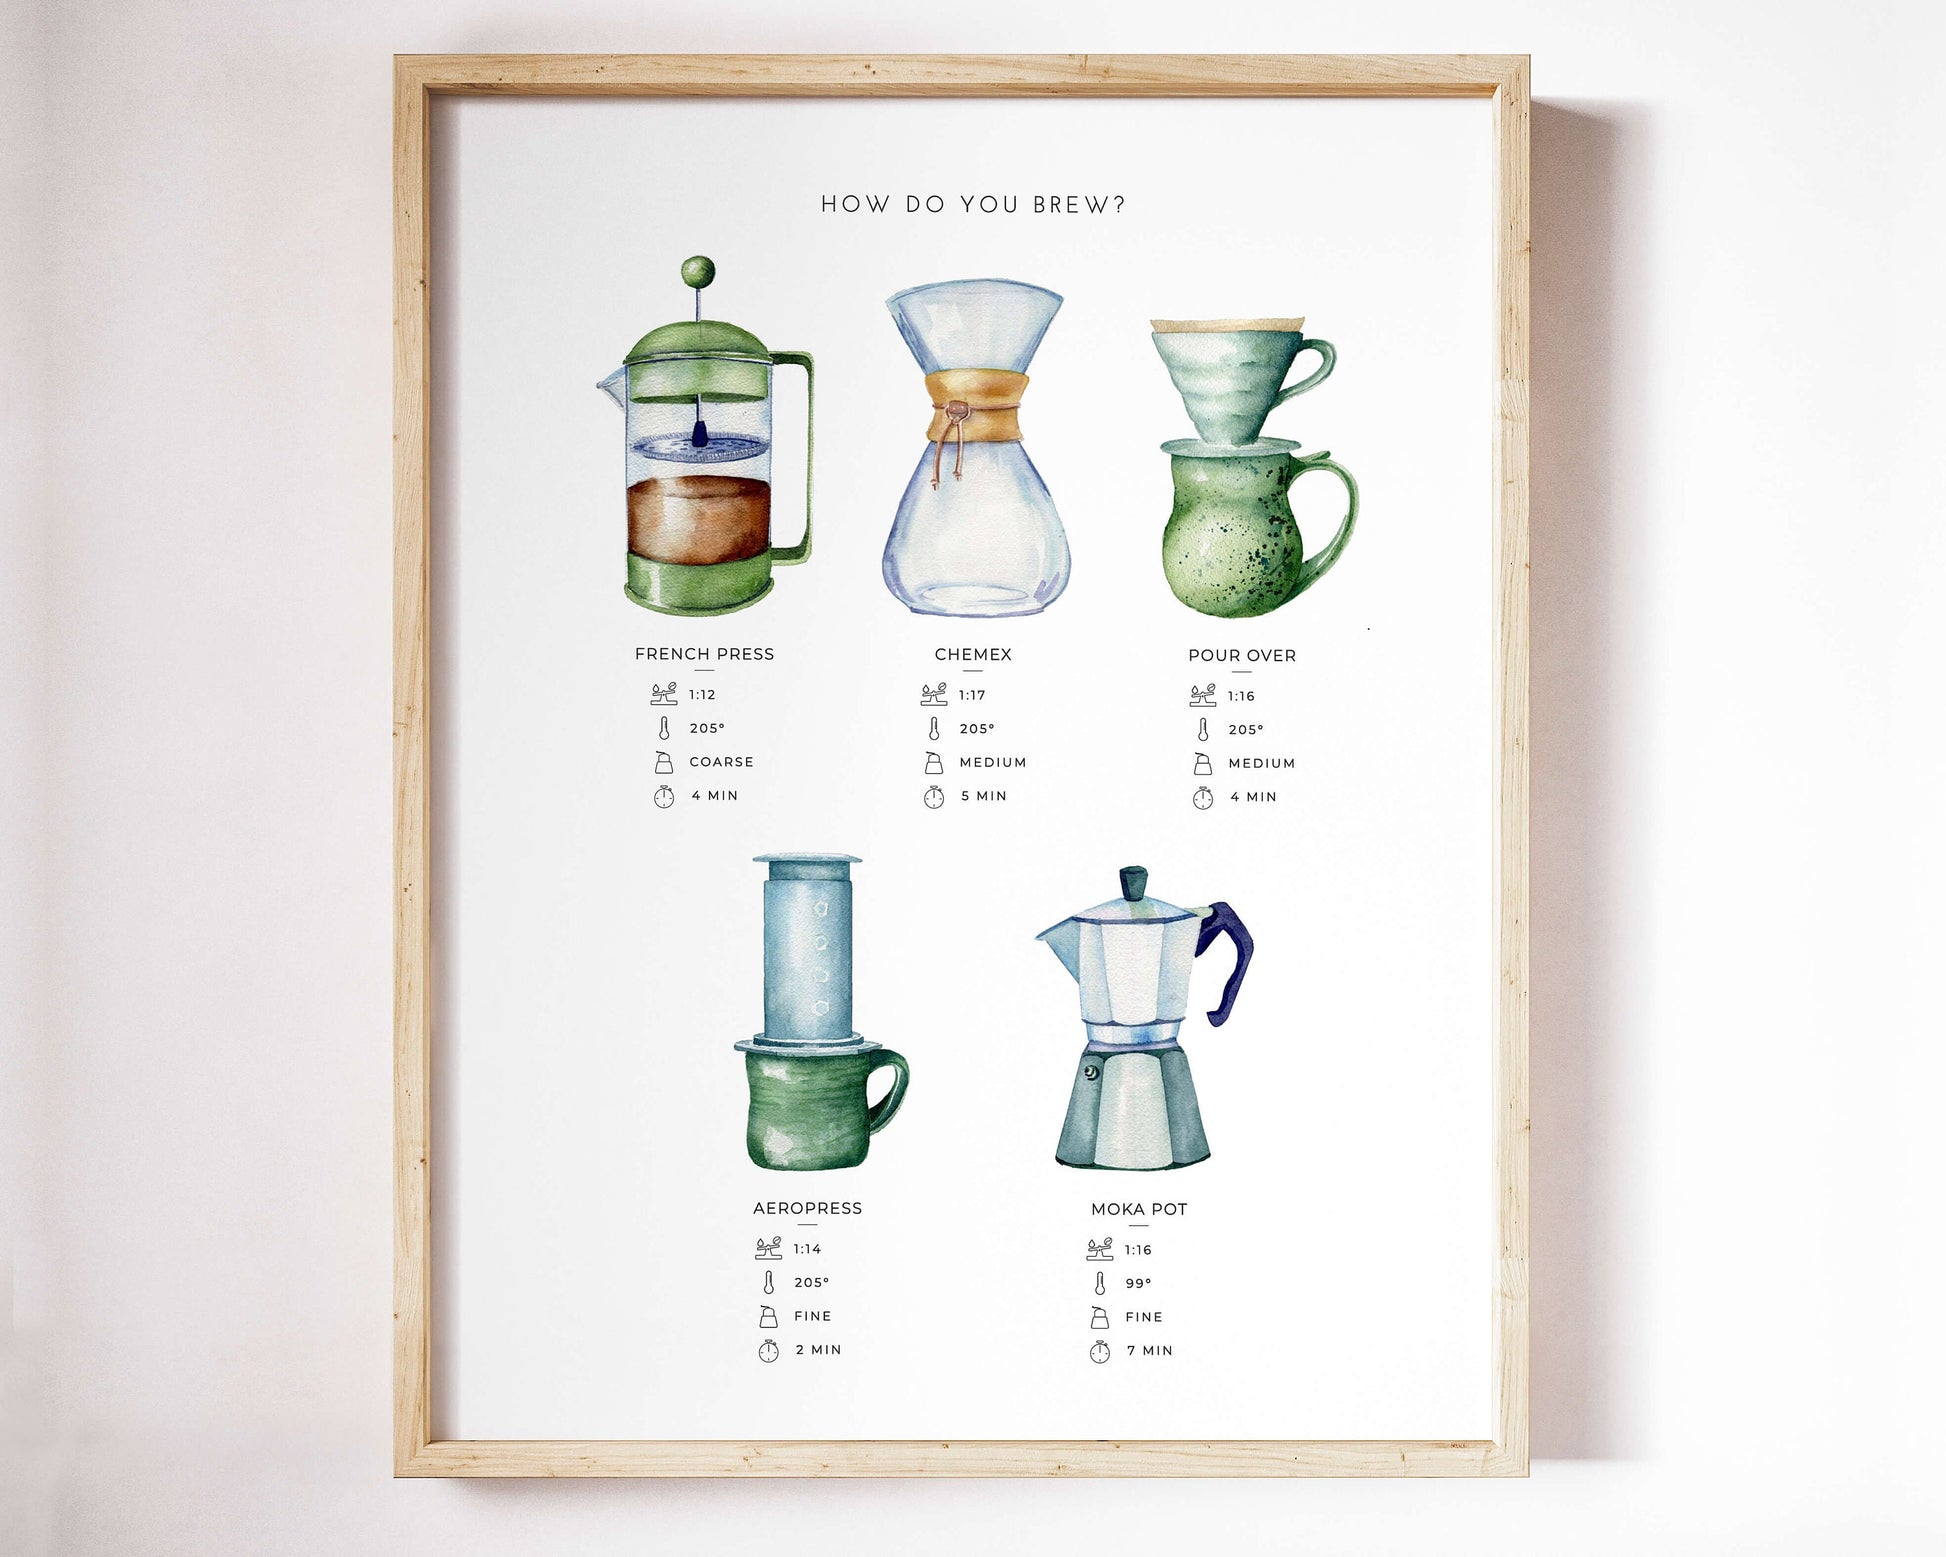 a watercolor painting of five different types of ways to brew coffee: french press, aero press, chemex, pour over, moka pot